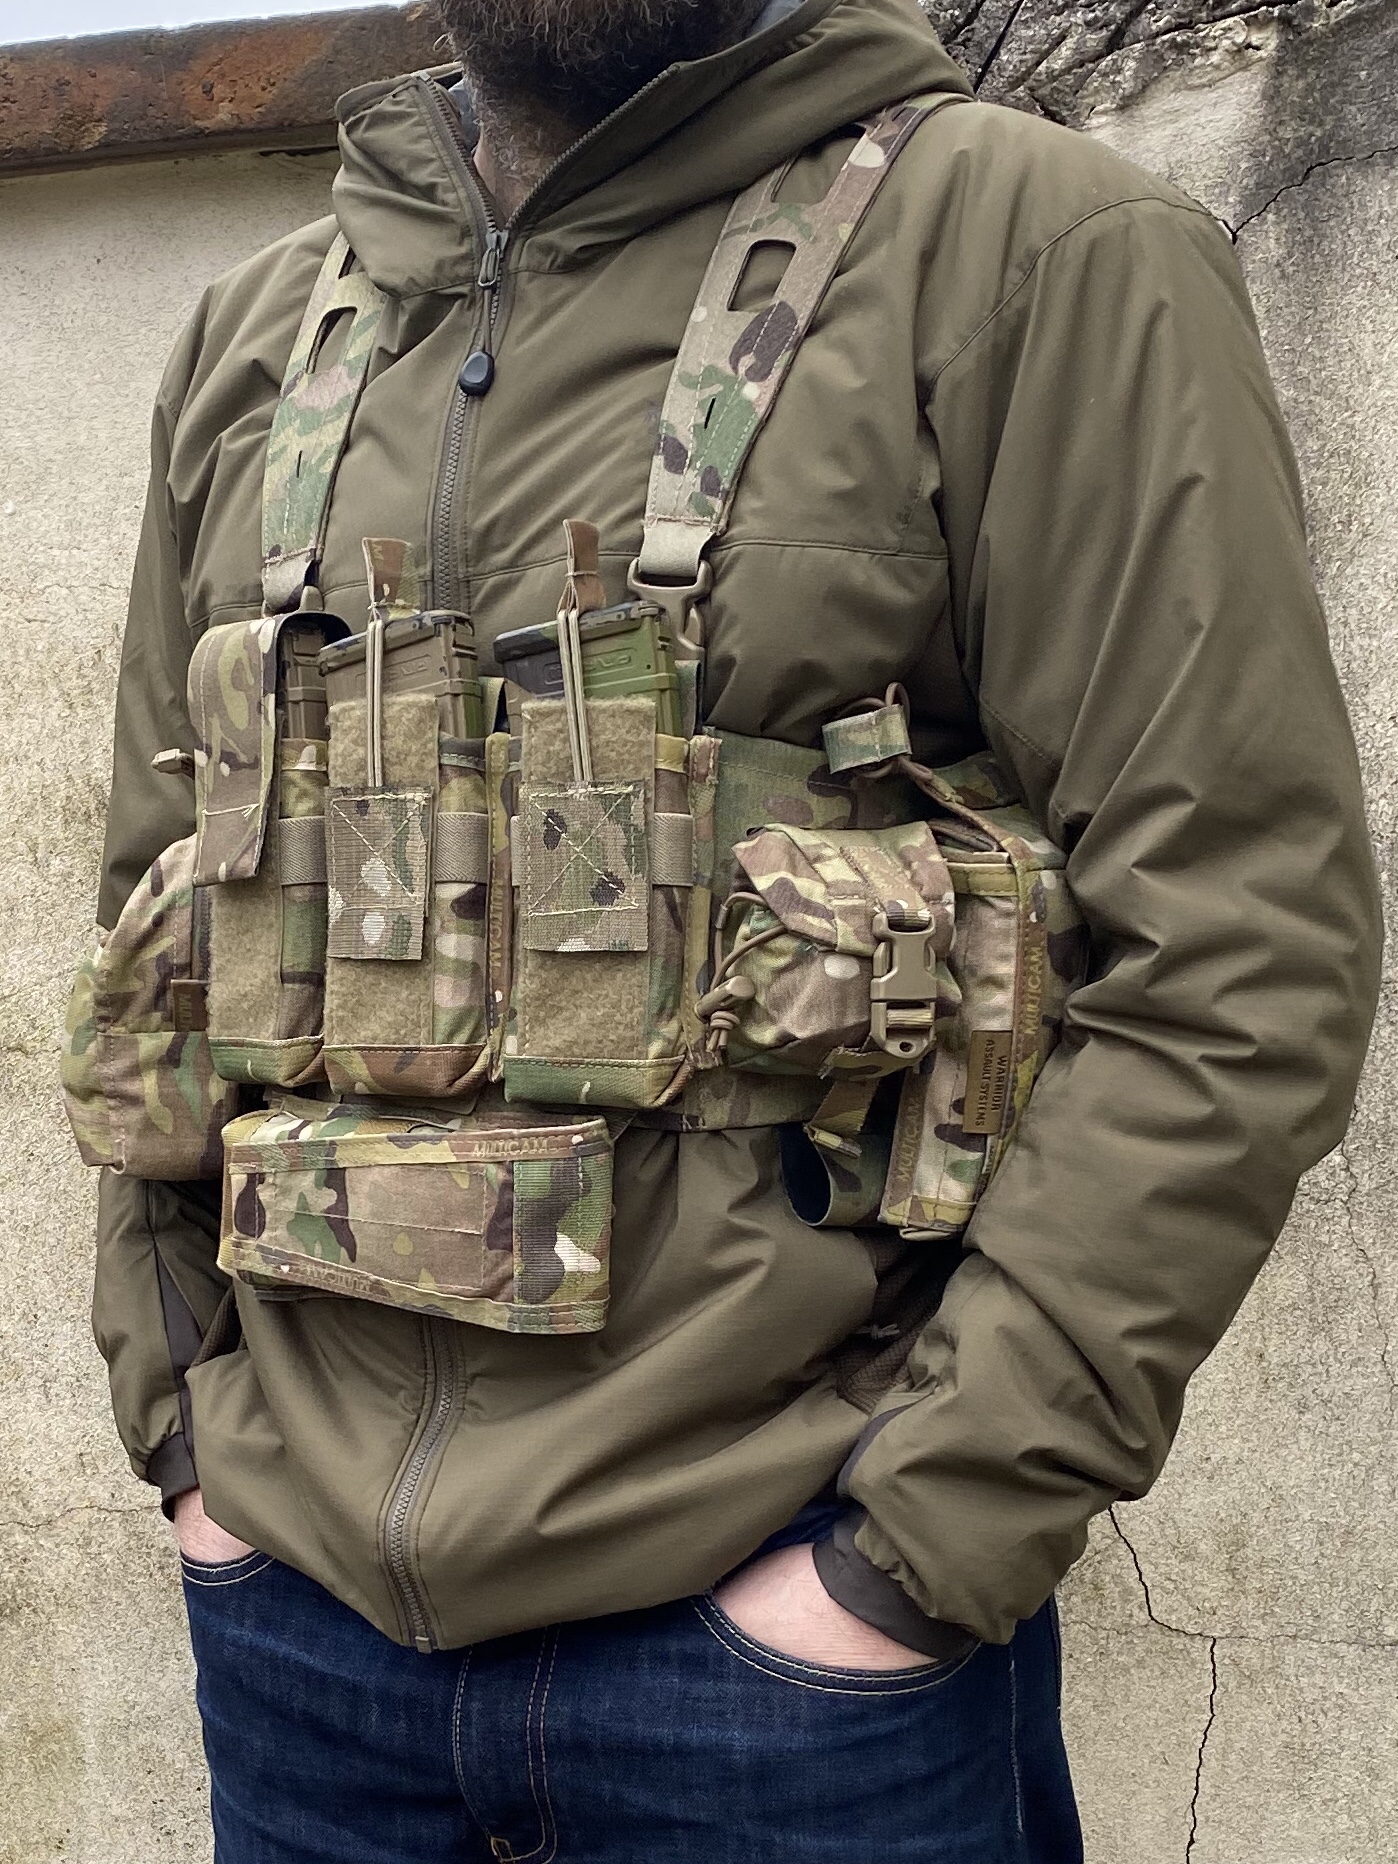 REVIEW: C2R FAST Single M4 Mag Pouch 2018 Model